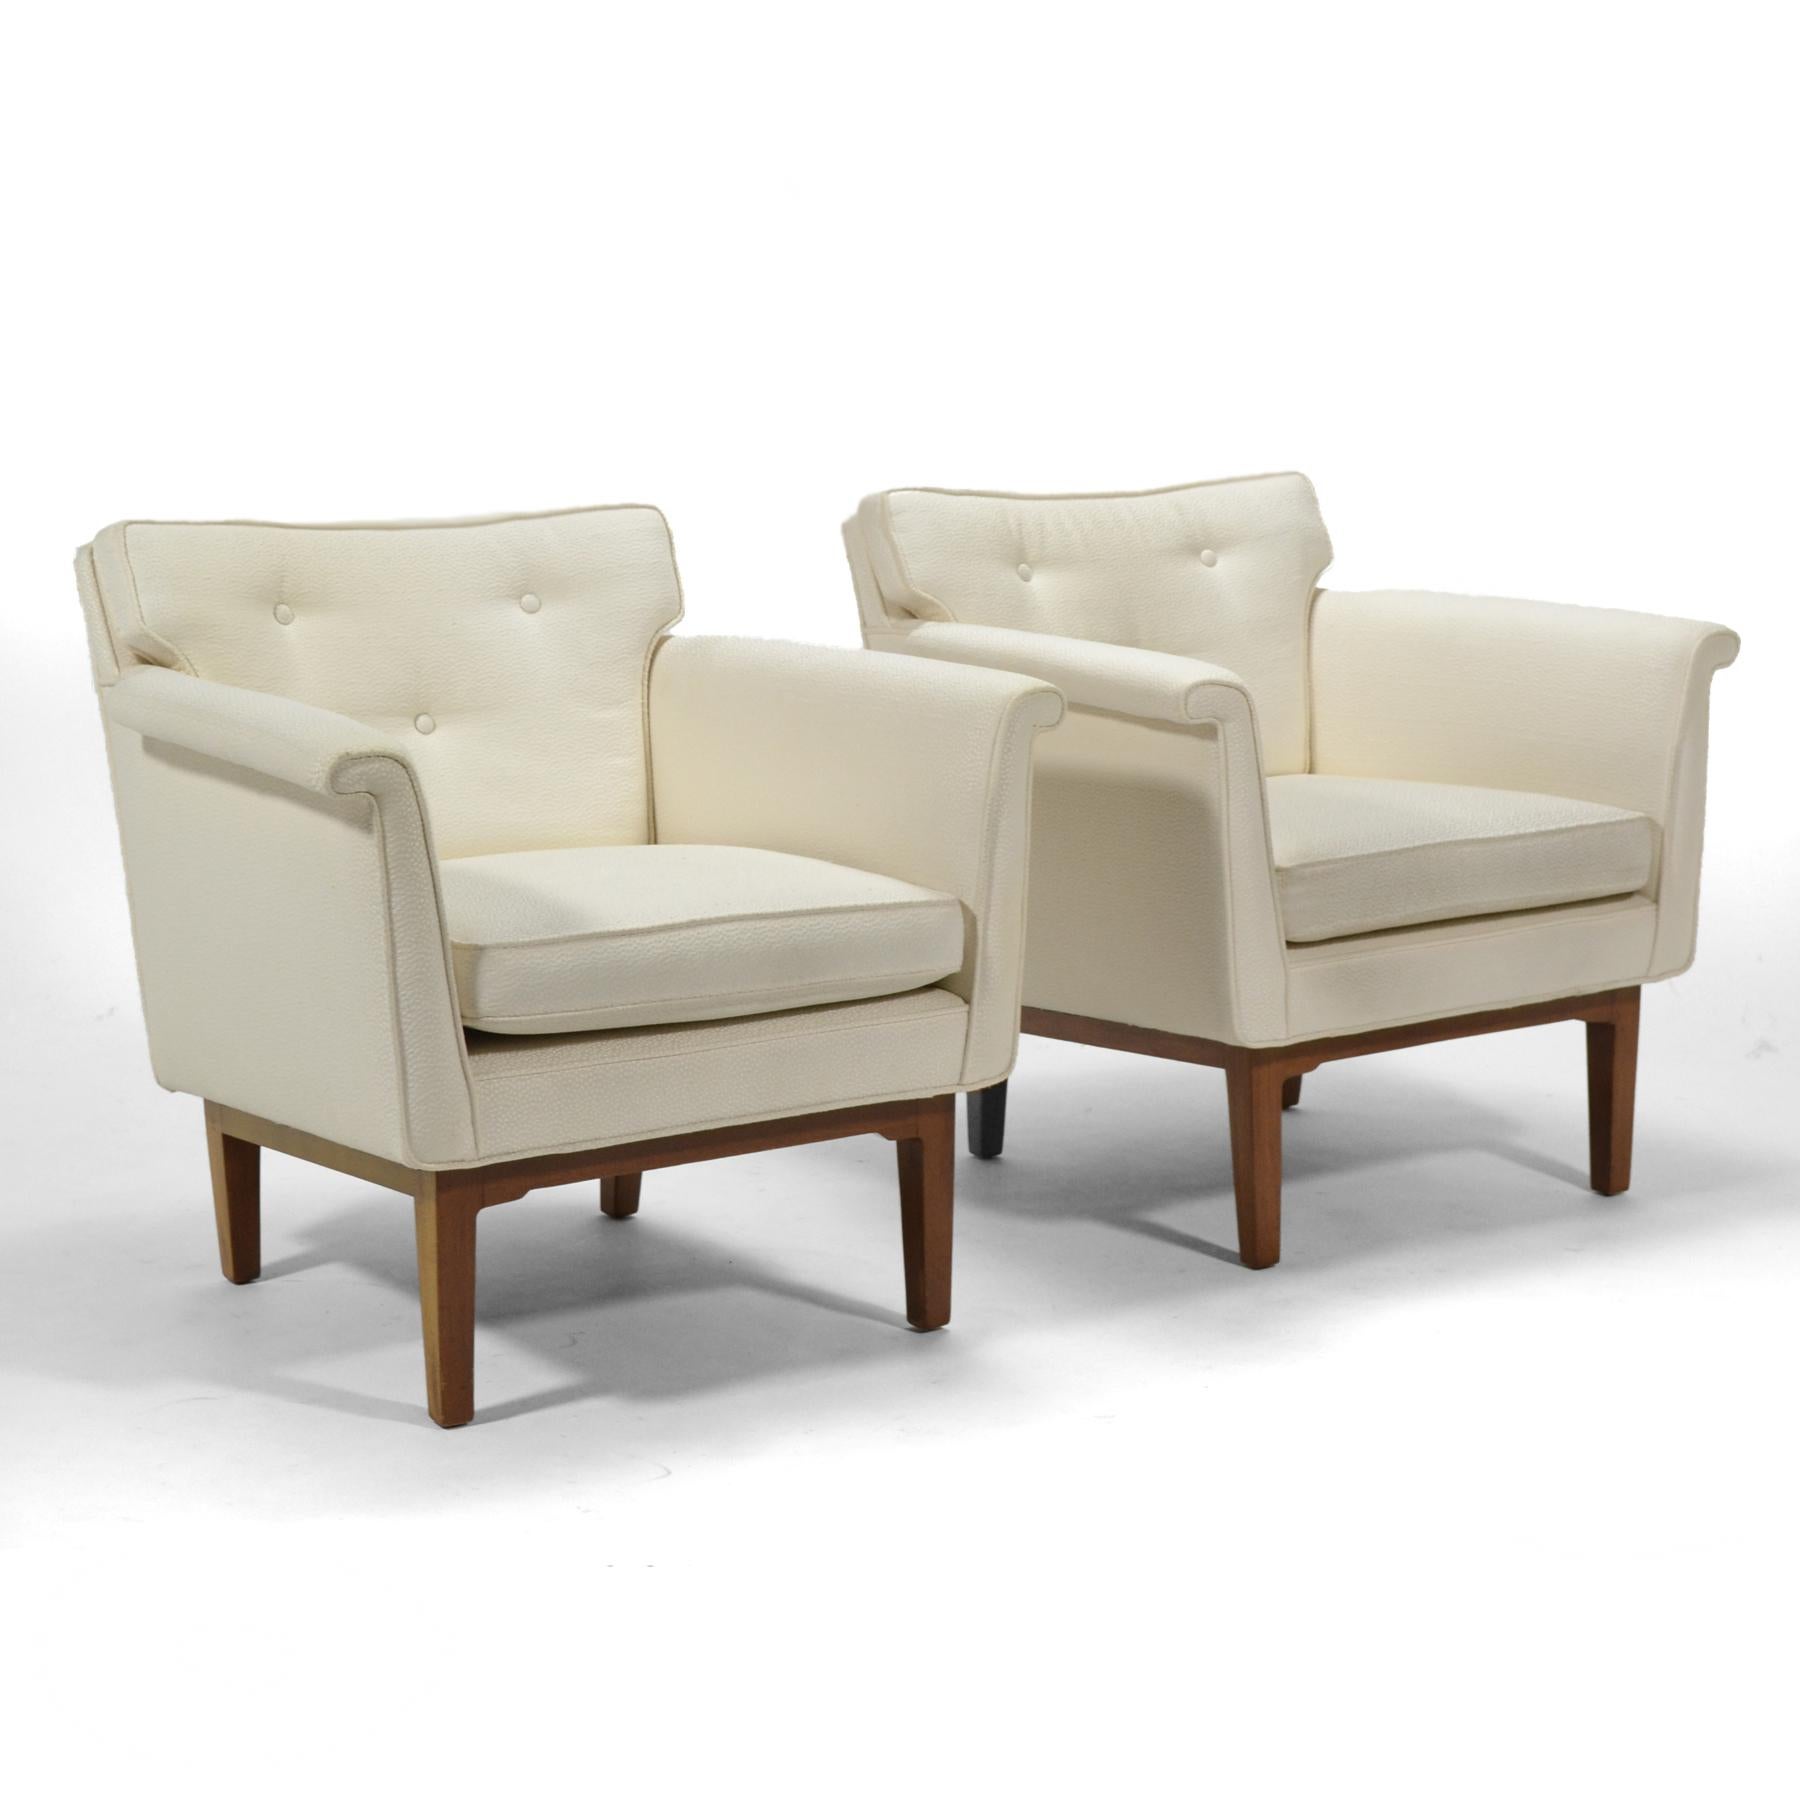 This lovely pair of 1950s Wormley model 5706 club chairs have wonderful, subtle details. 

Also available are a pair of loveseats of the same design.